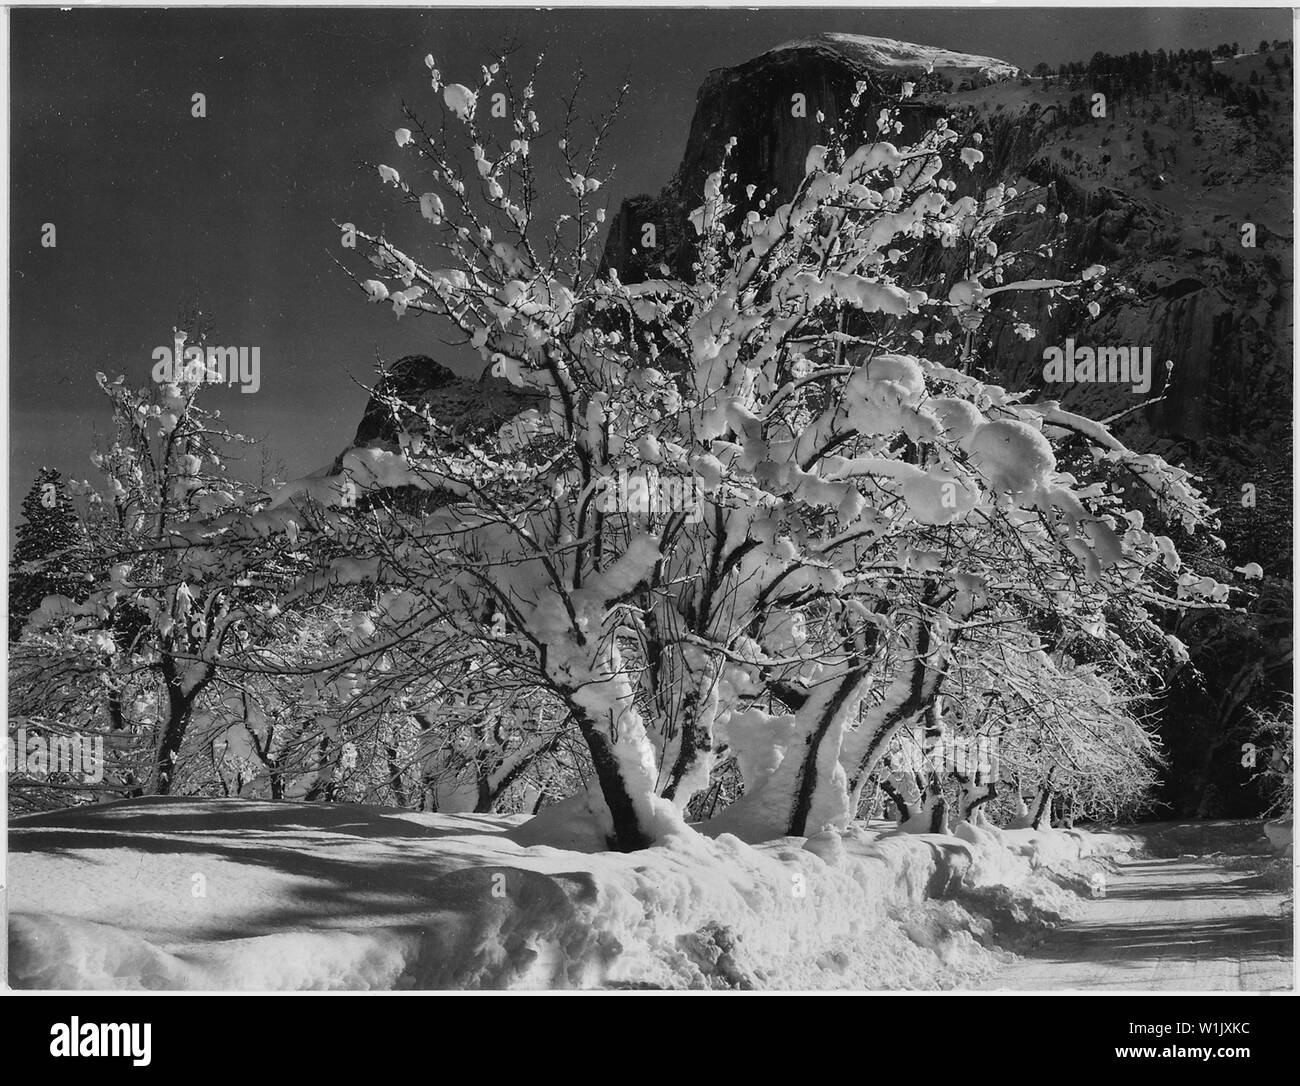 Trees with snow on branches, Half Dome, Apple Orchard, Yosemite, California. April 1933., 1933 Stock Photo